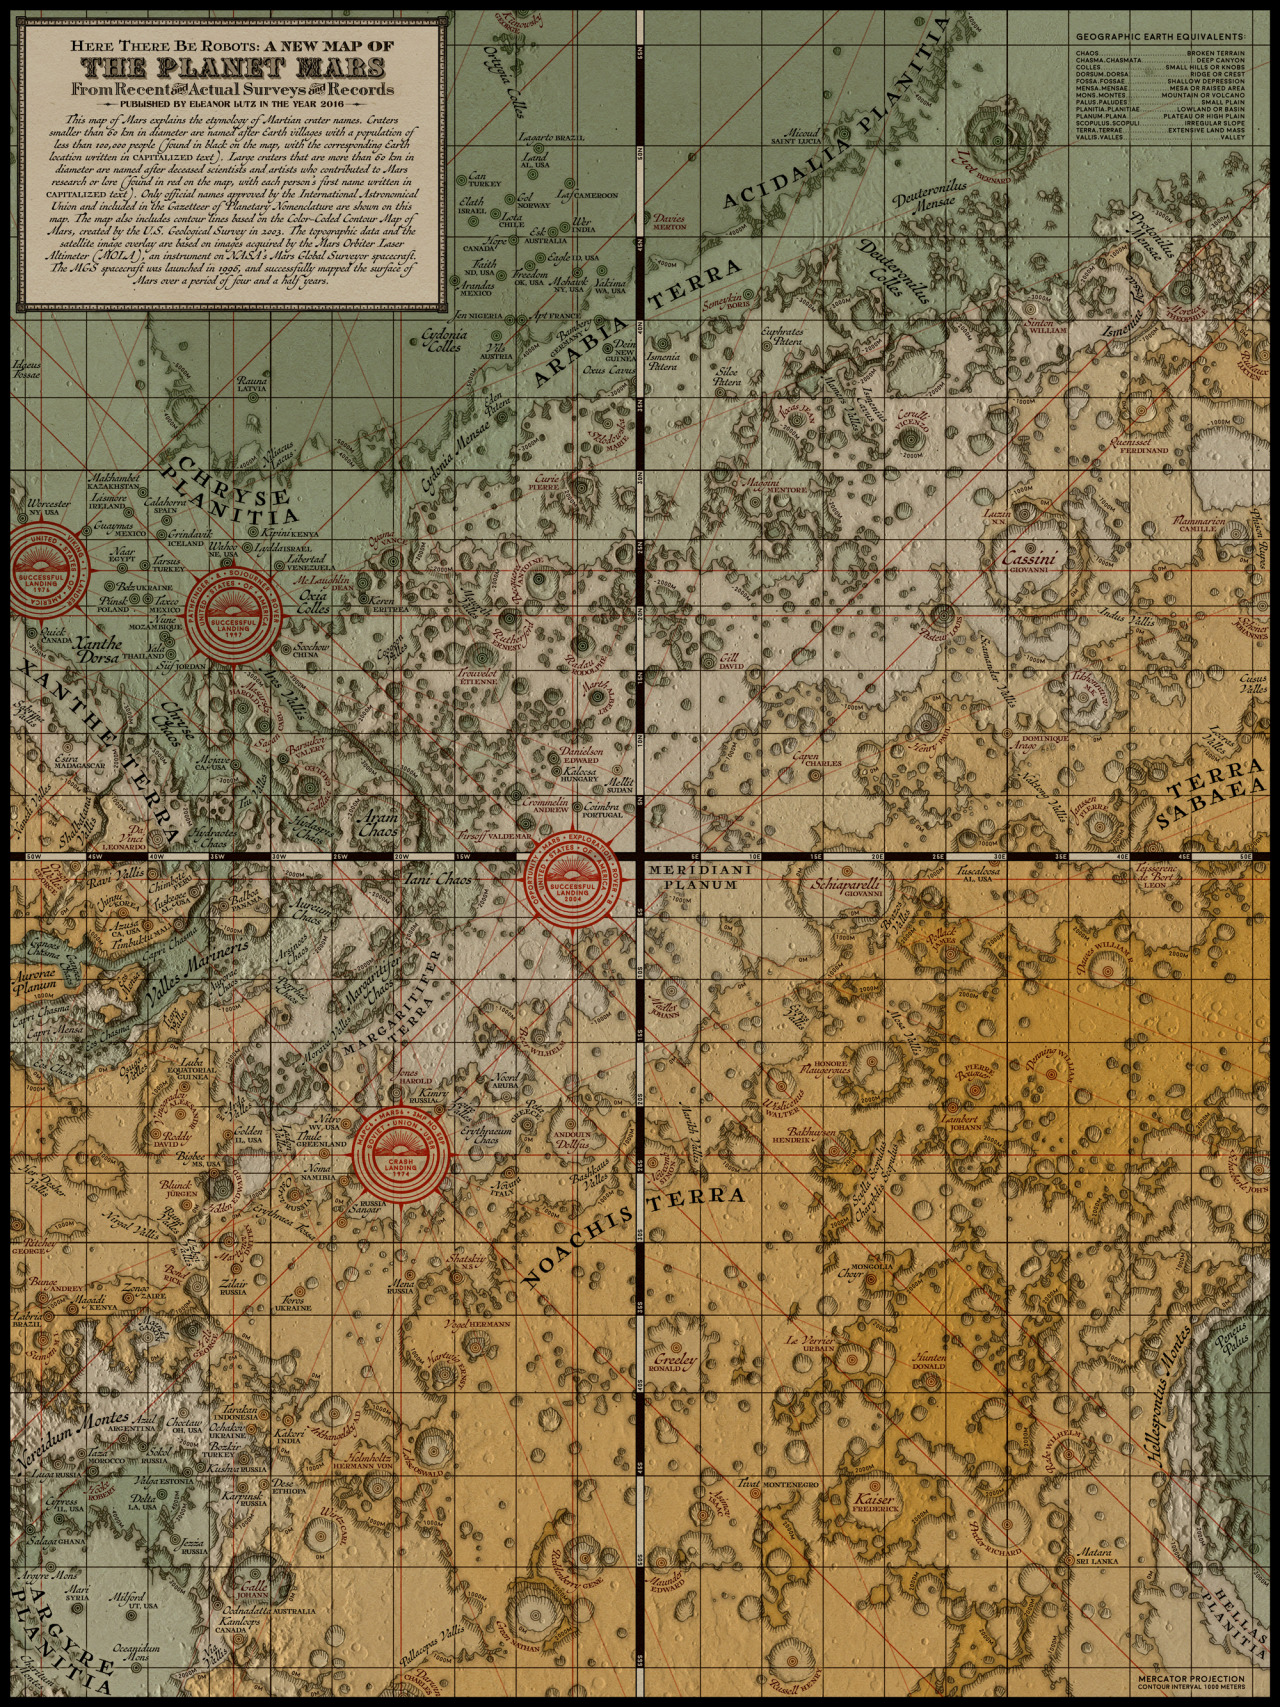 Here there be robots: A medieval map of Mars &ndash; Eleanor Lutz